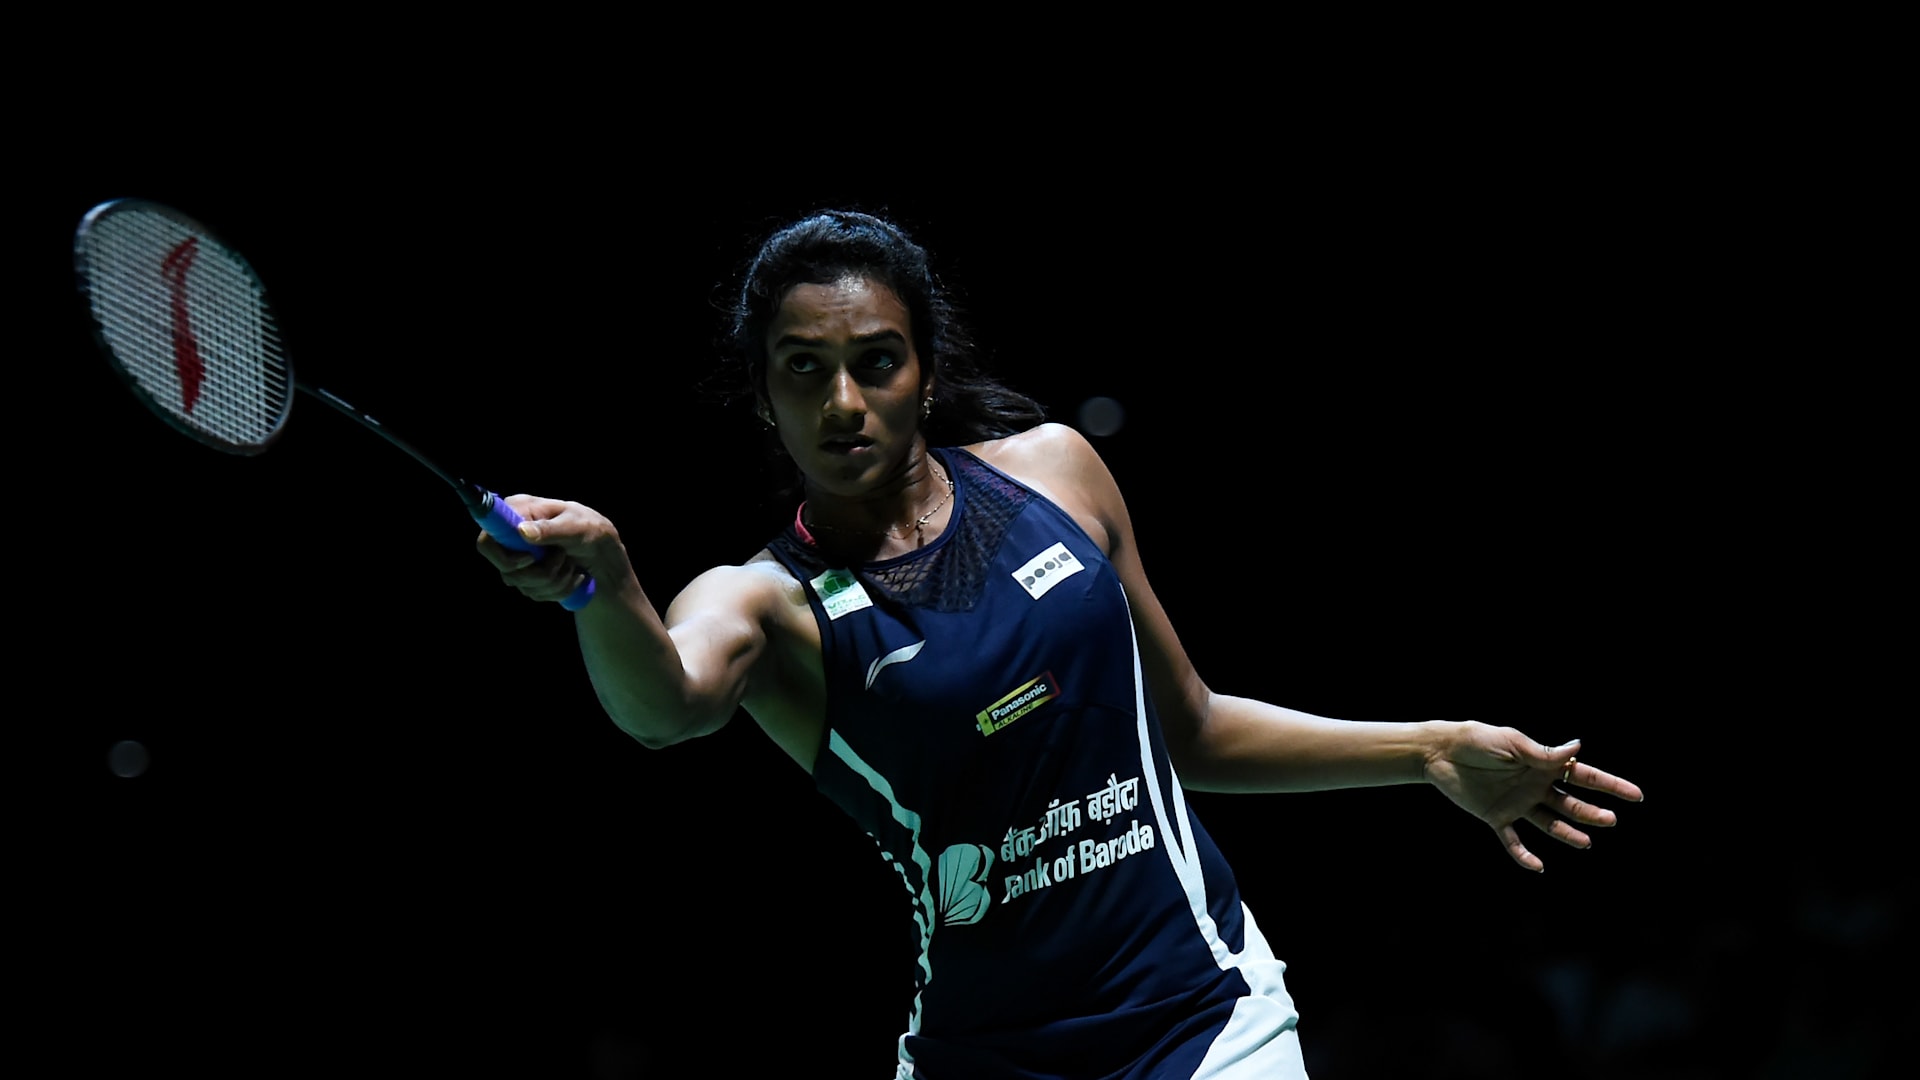 Thailand Open badminton Full schedule, draw, telecast and where to watch live streaming in India